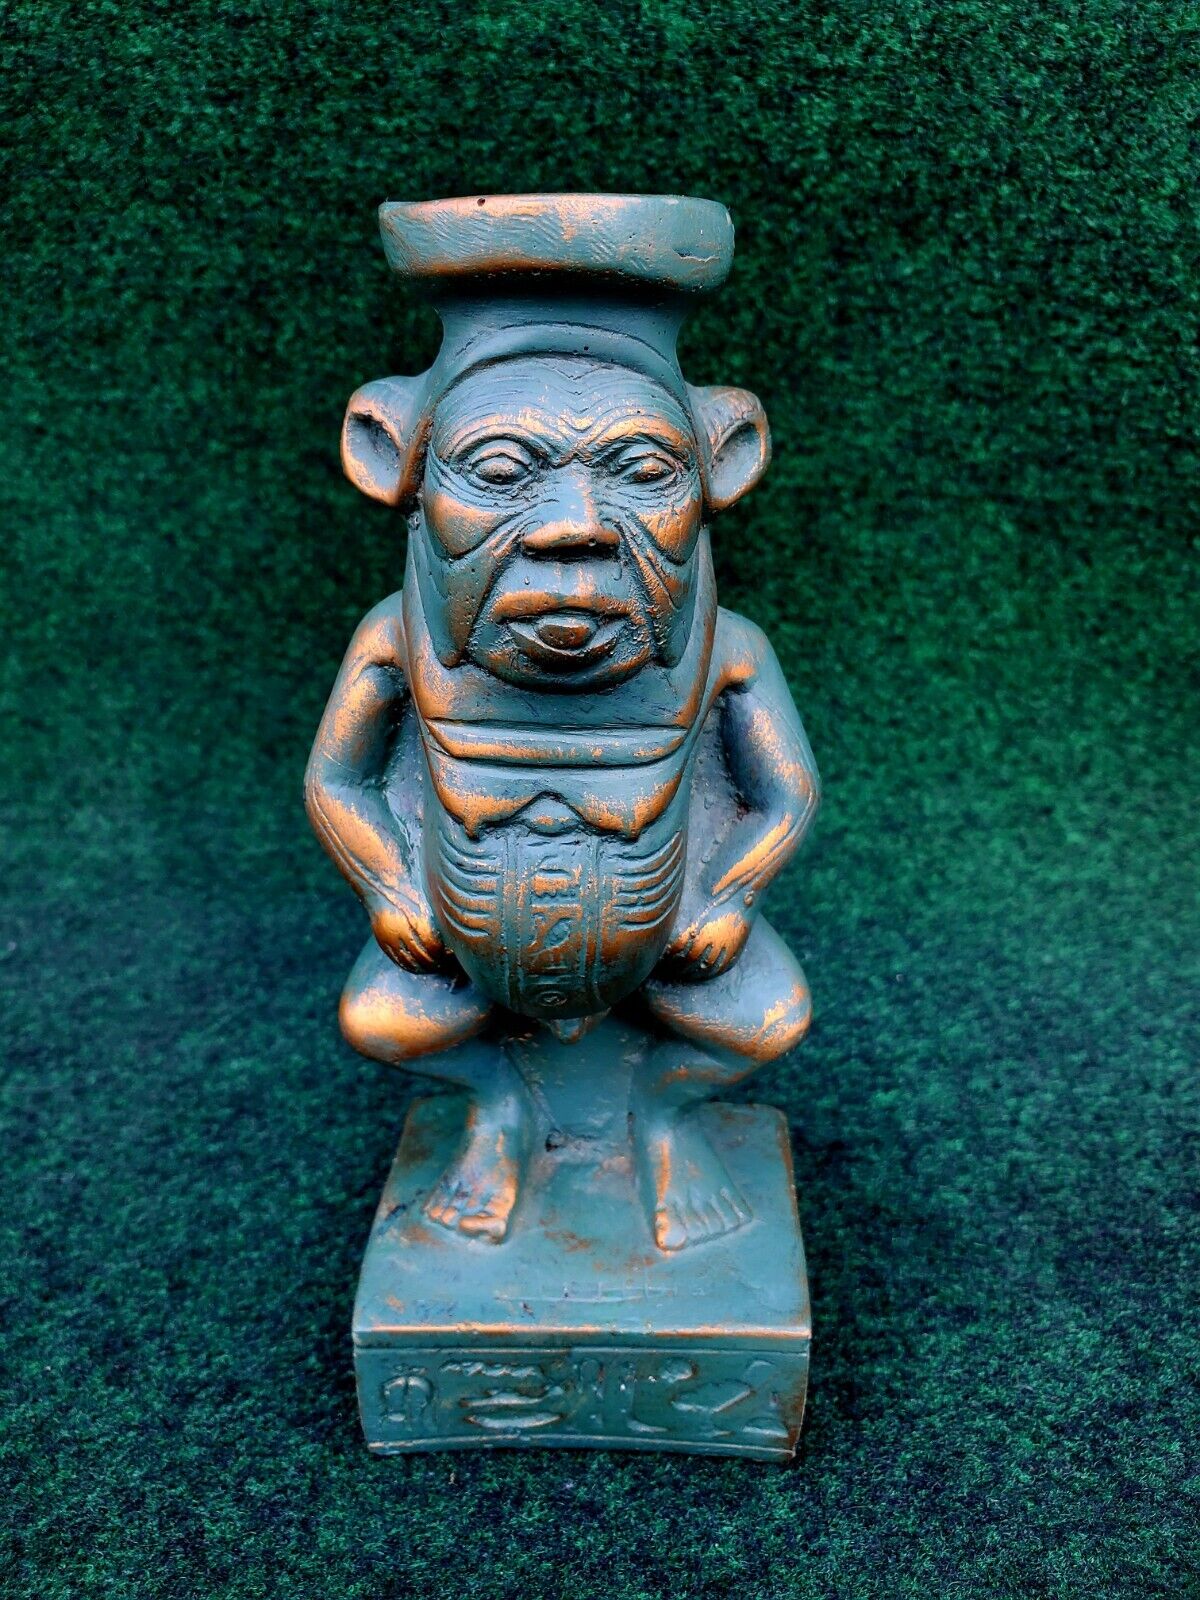 Rare Bes Statue Made of Cyan Stone and Gold Leaf